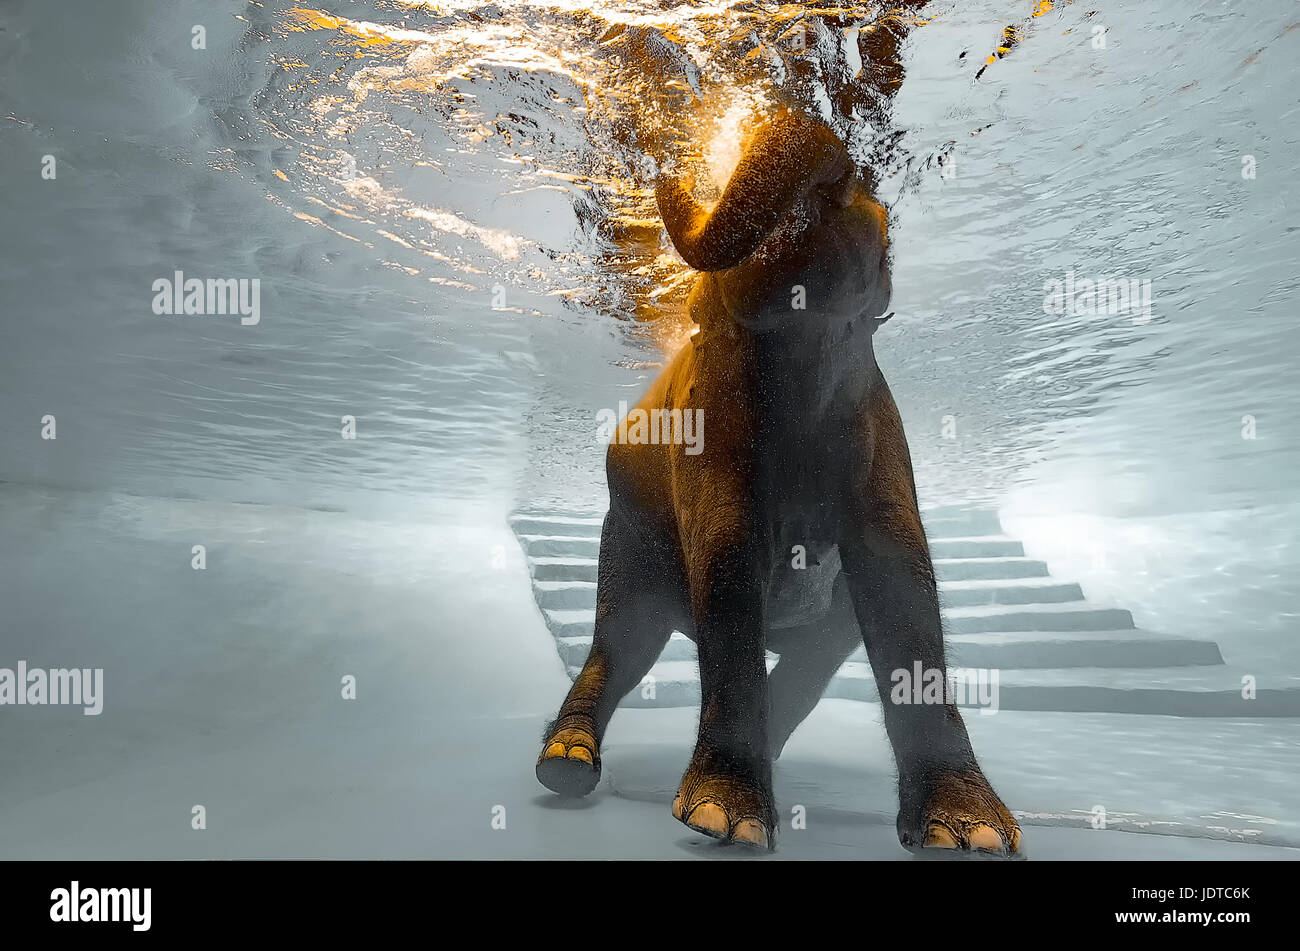 An elephant dives into a pool while twirling his trunk and dancing under the water as part of an Elephant Show at “khao kheow” Open Zoo, Thailand. Stock Photo